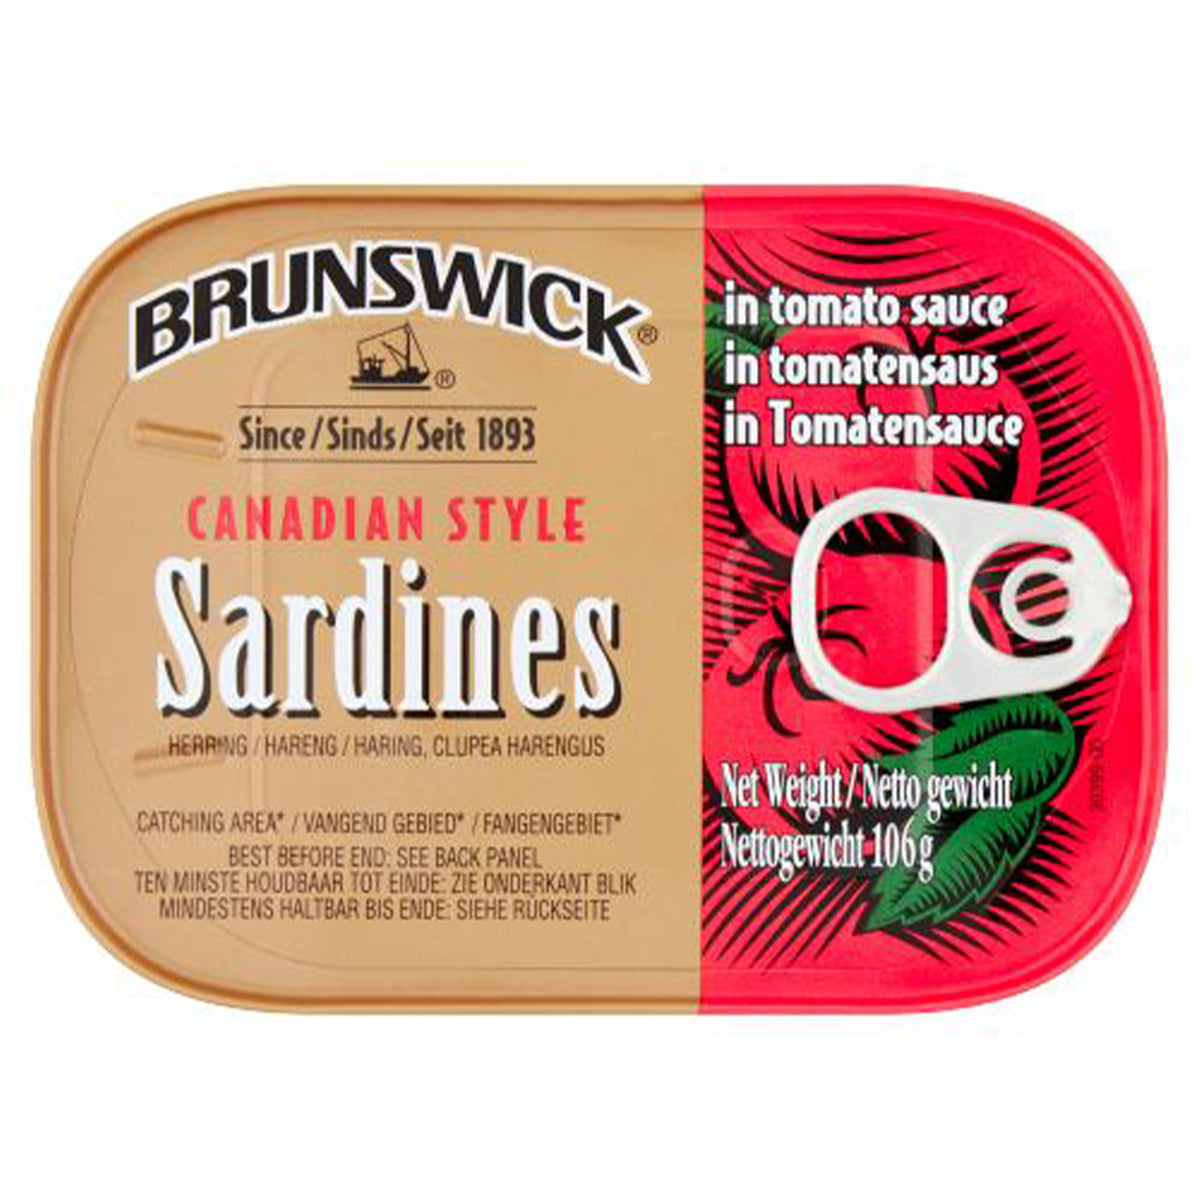 Brunswick - Canadian Style Sardines in Tomato Sauce - 106g - Continental Food Store